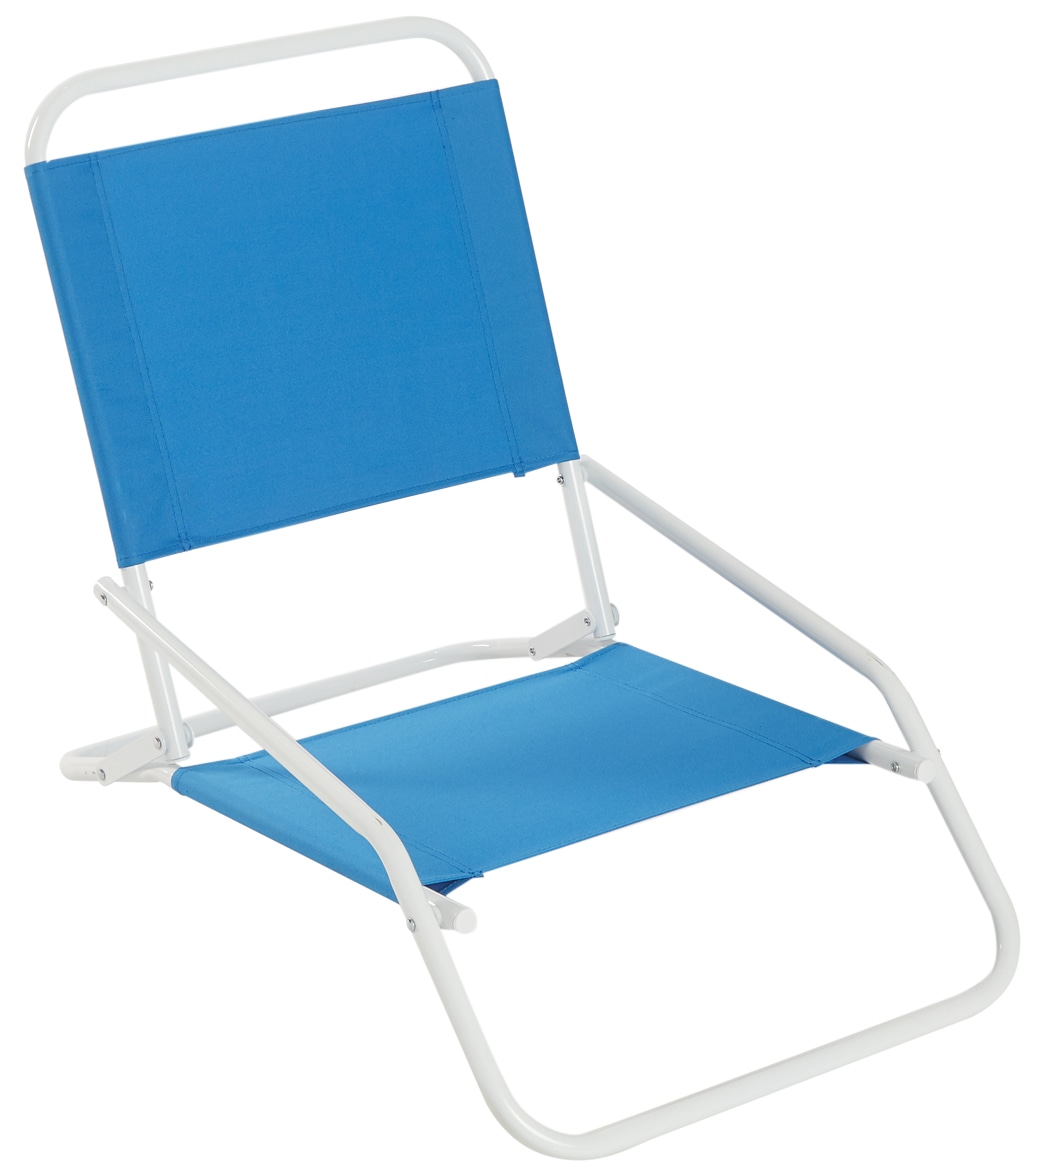 Wet Products Balboa Beach Chair at 